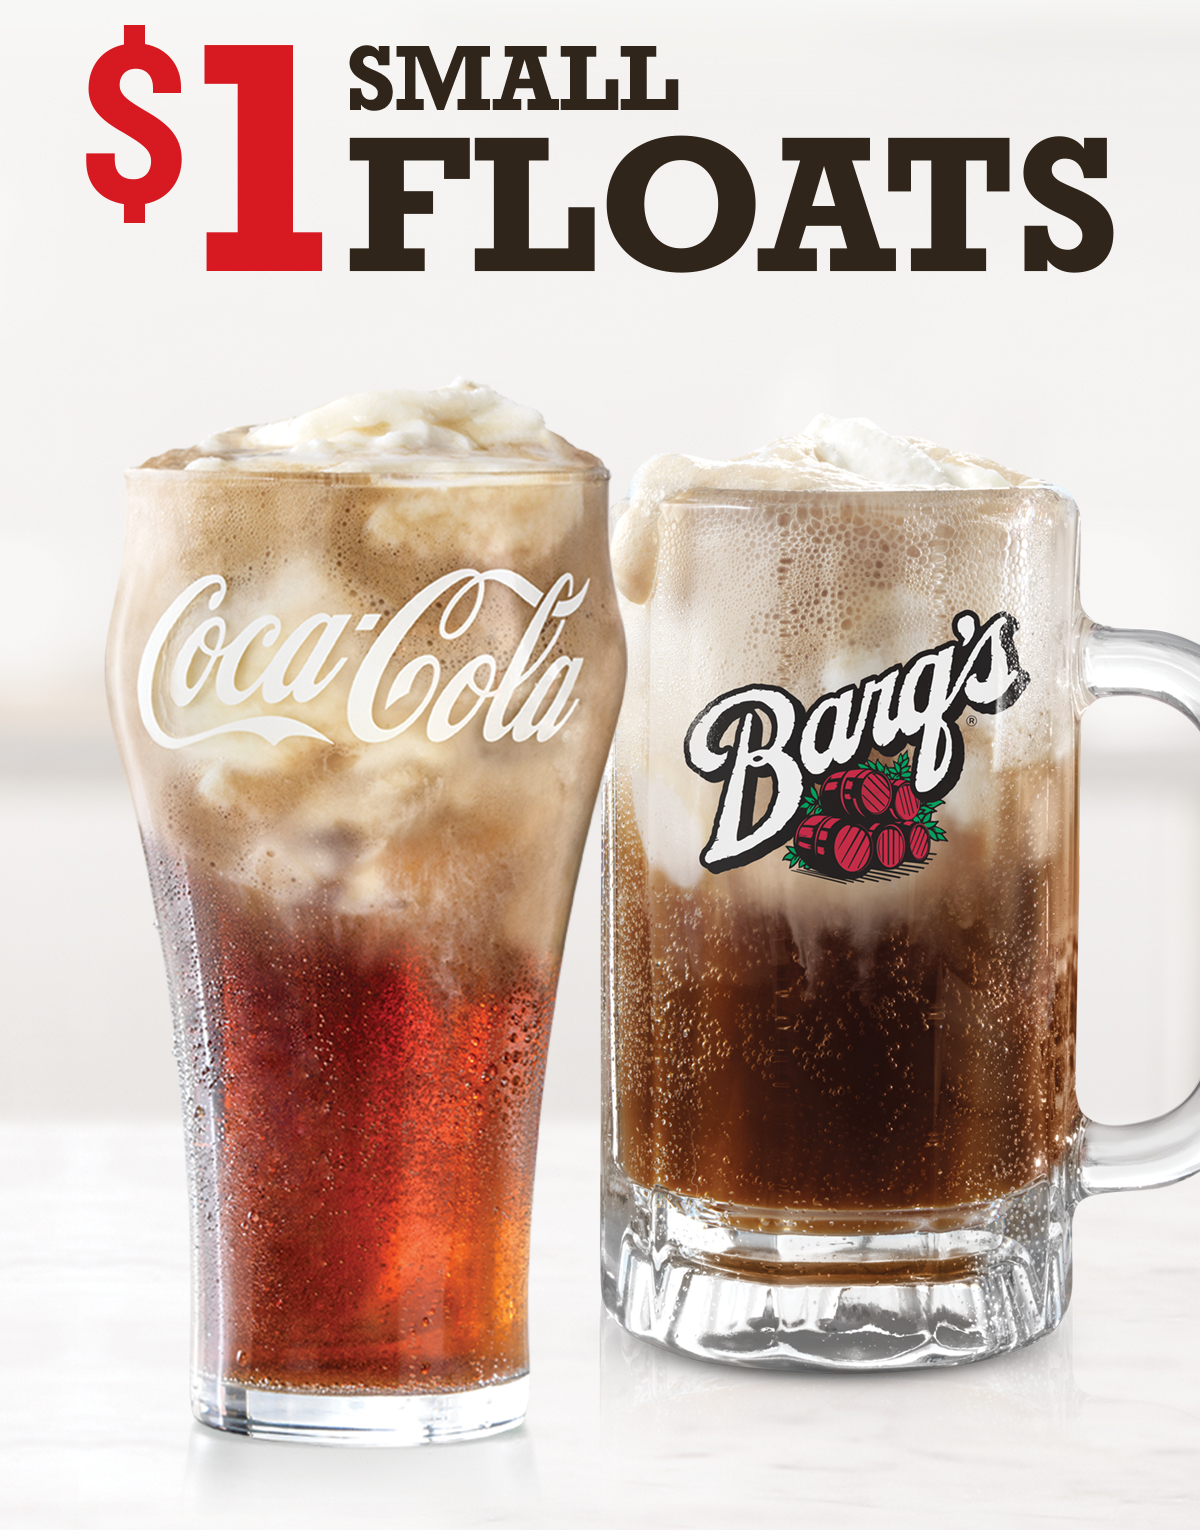 $1 Small Floats